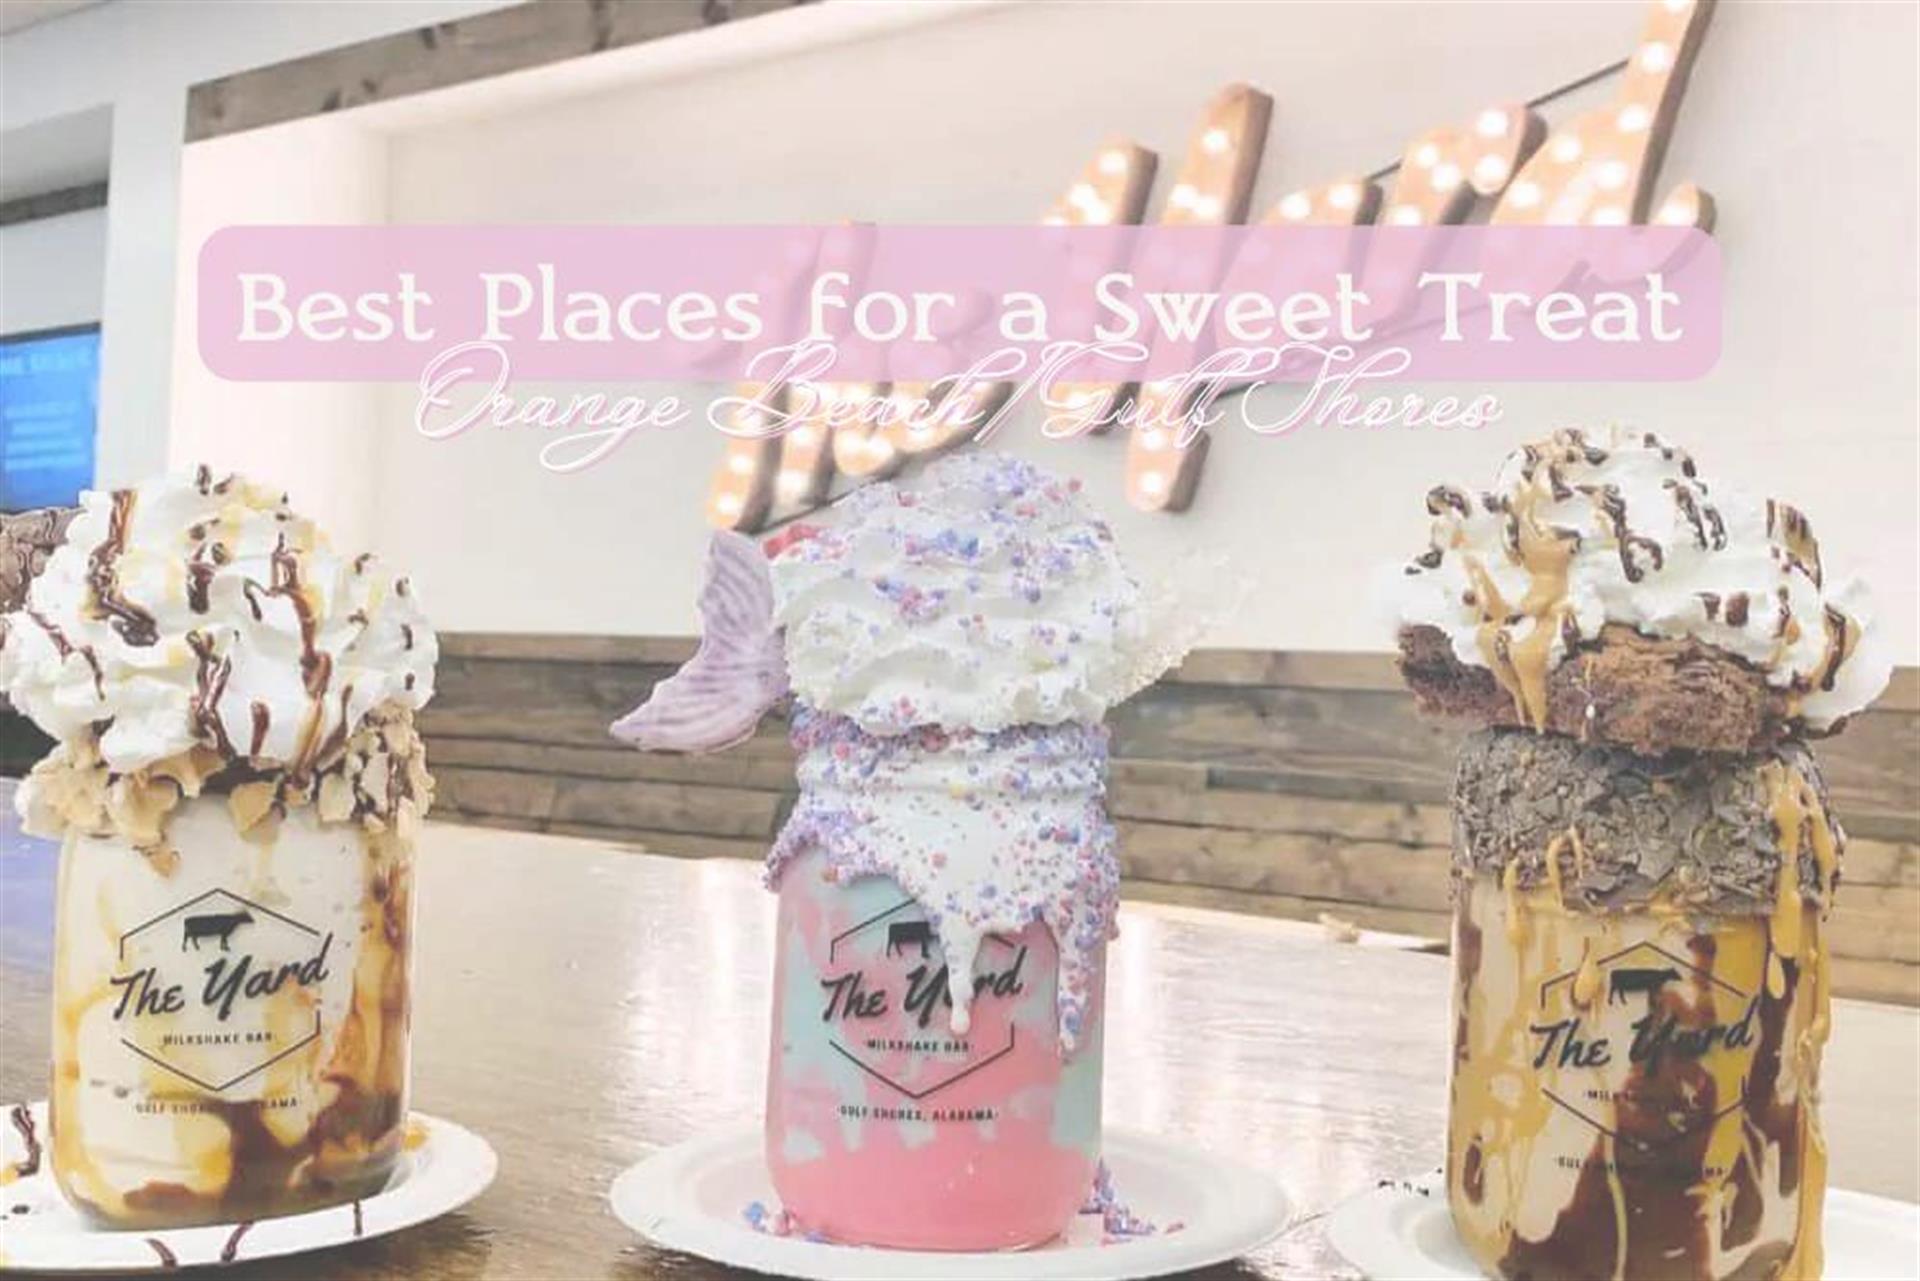 Best Places for a Sweet Treat